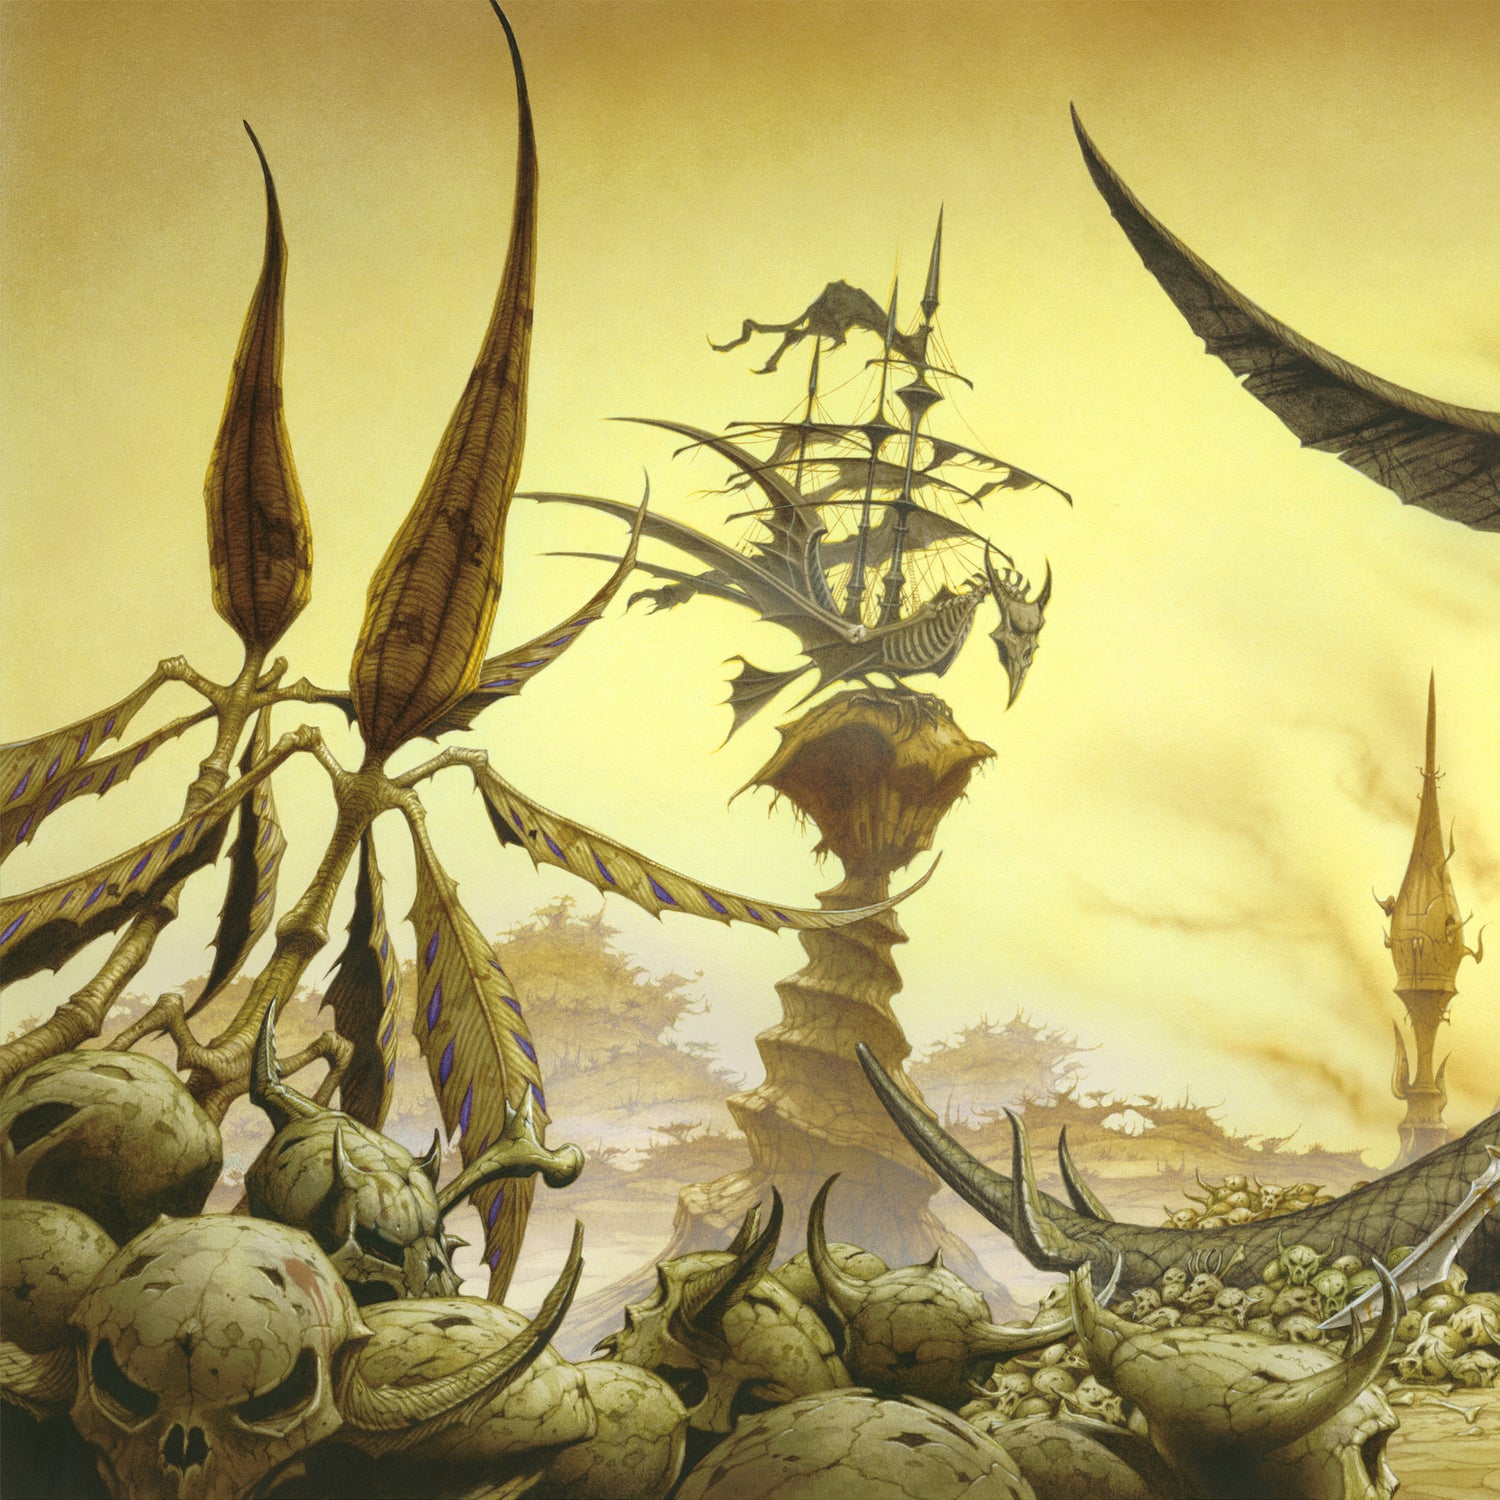 ime on our Side Limited edition print (Left) by Rodney Matthews featuring The Rolling Stones | Rodney Matthews Studios